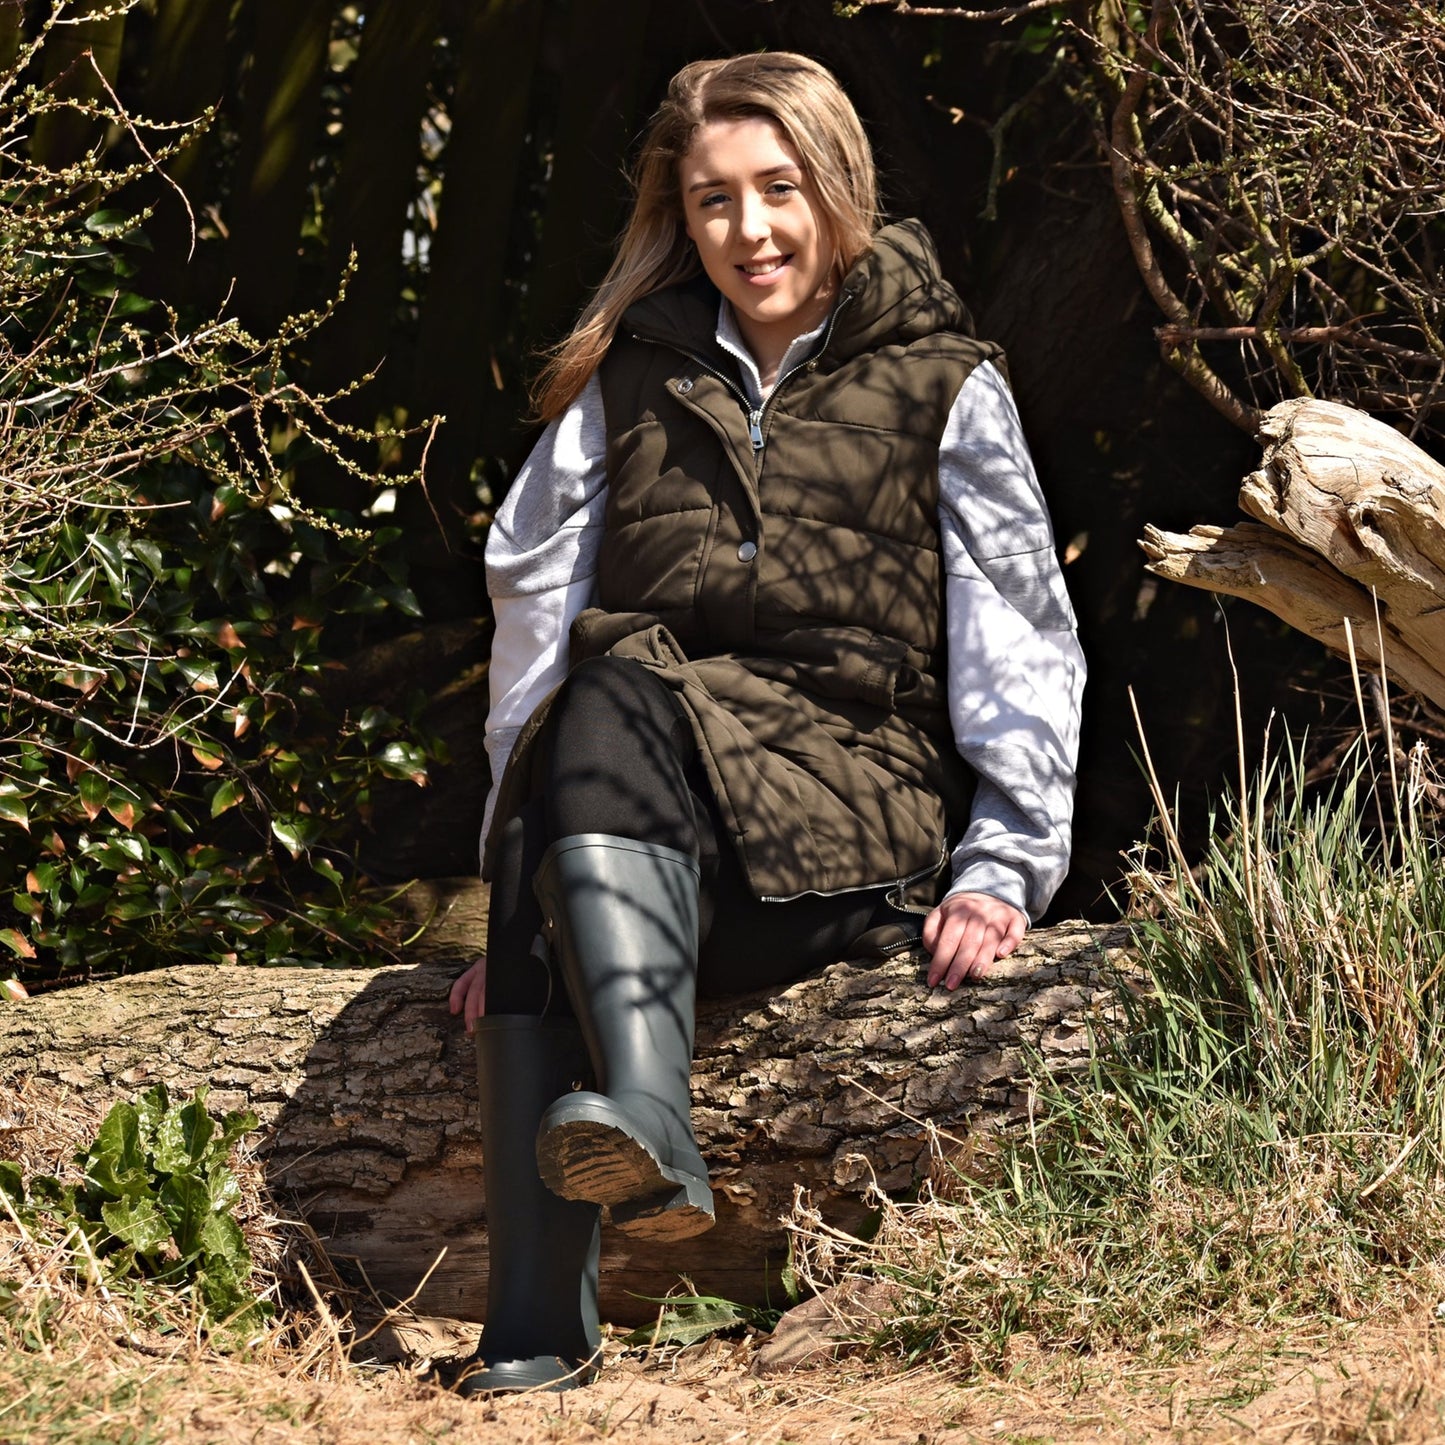 wearing wellies on a log